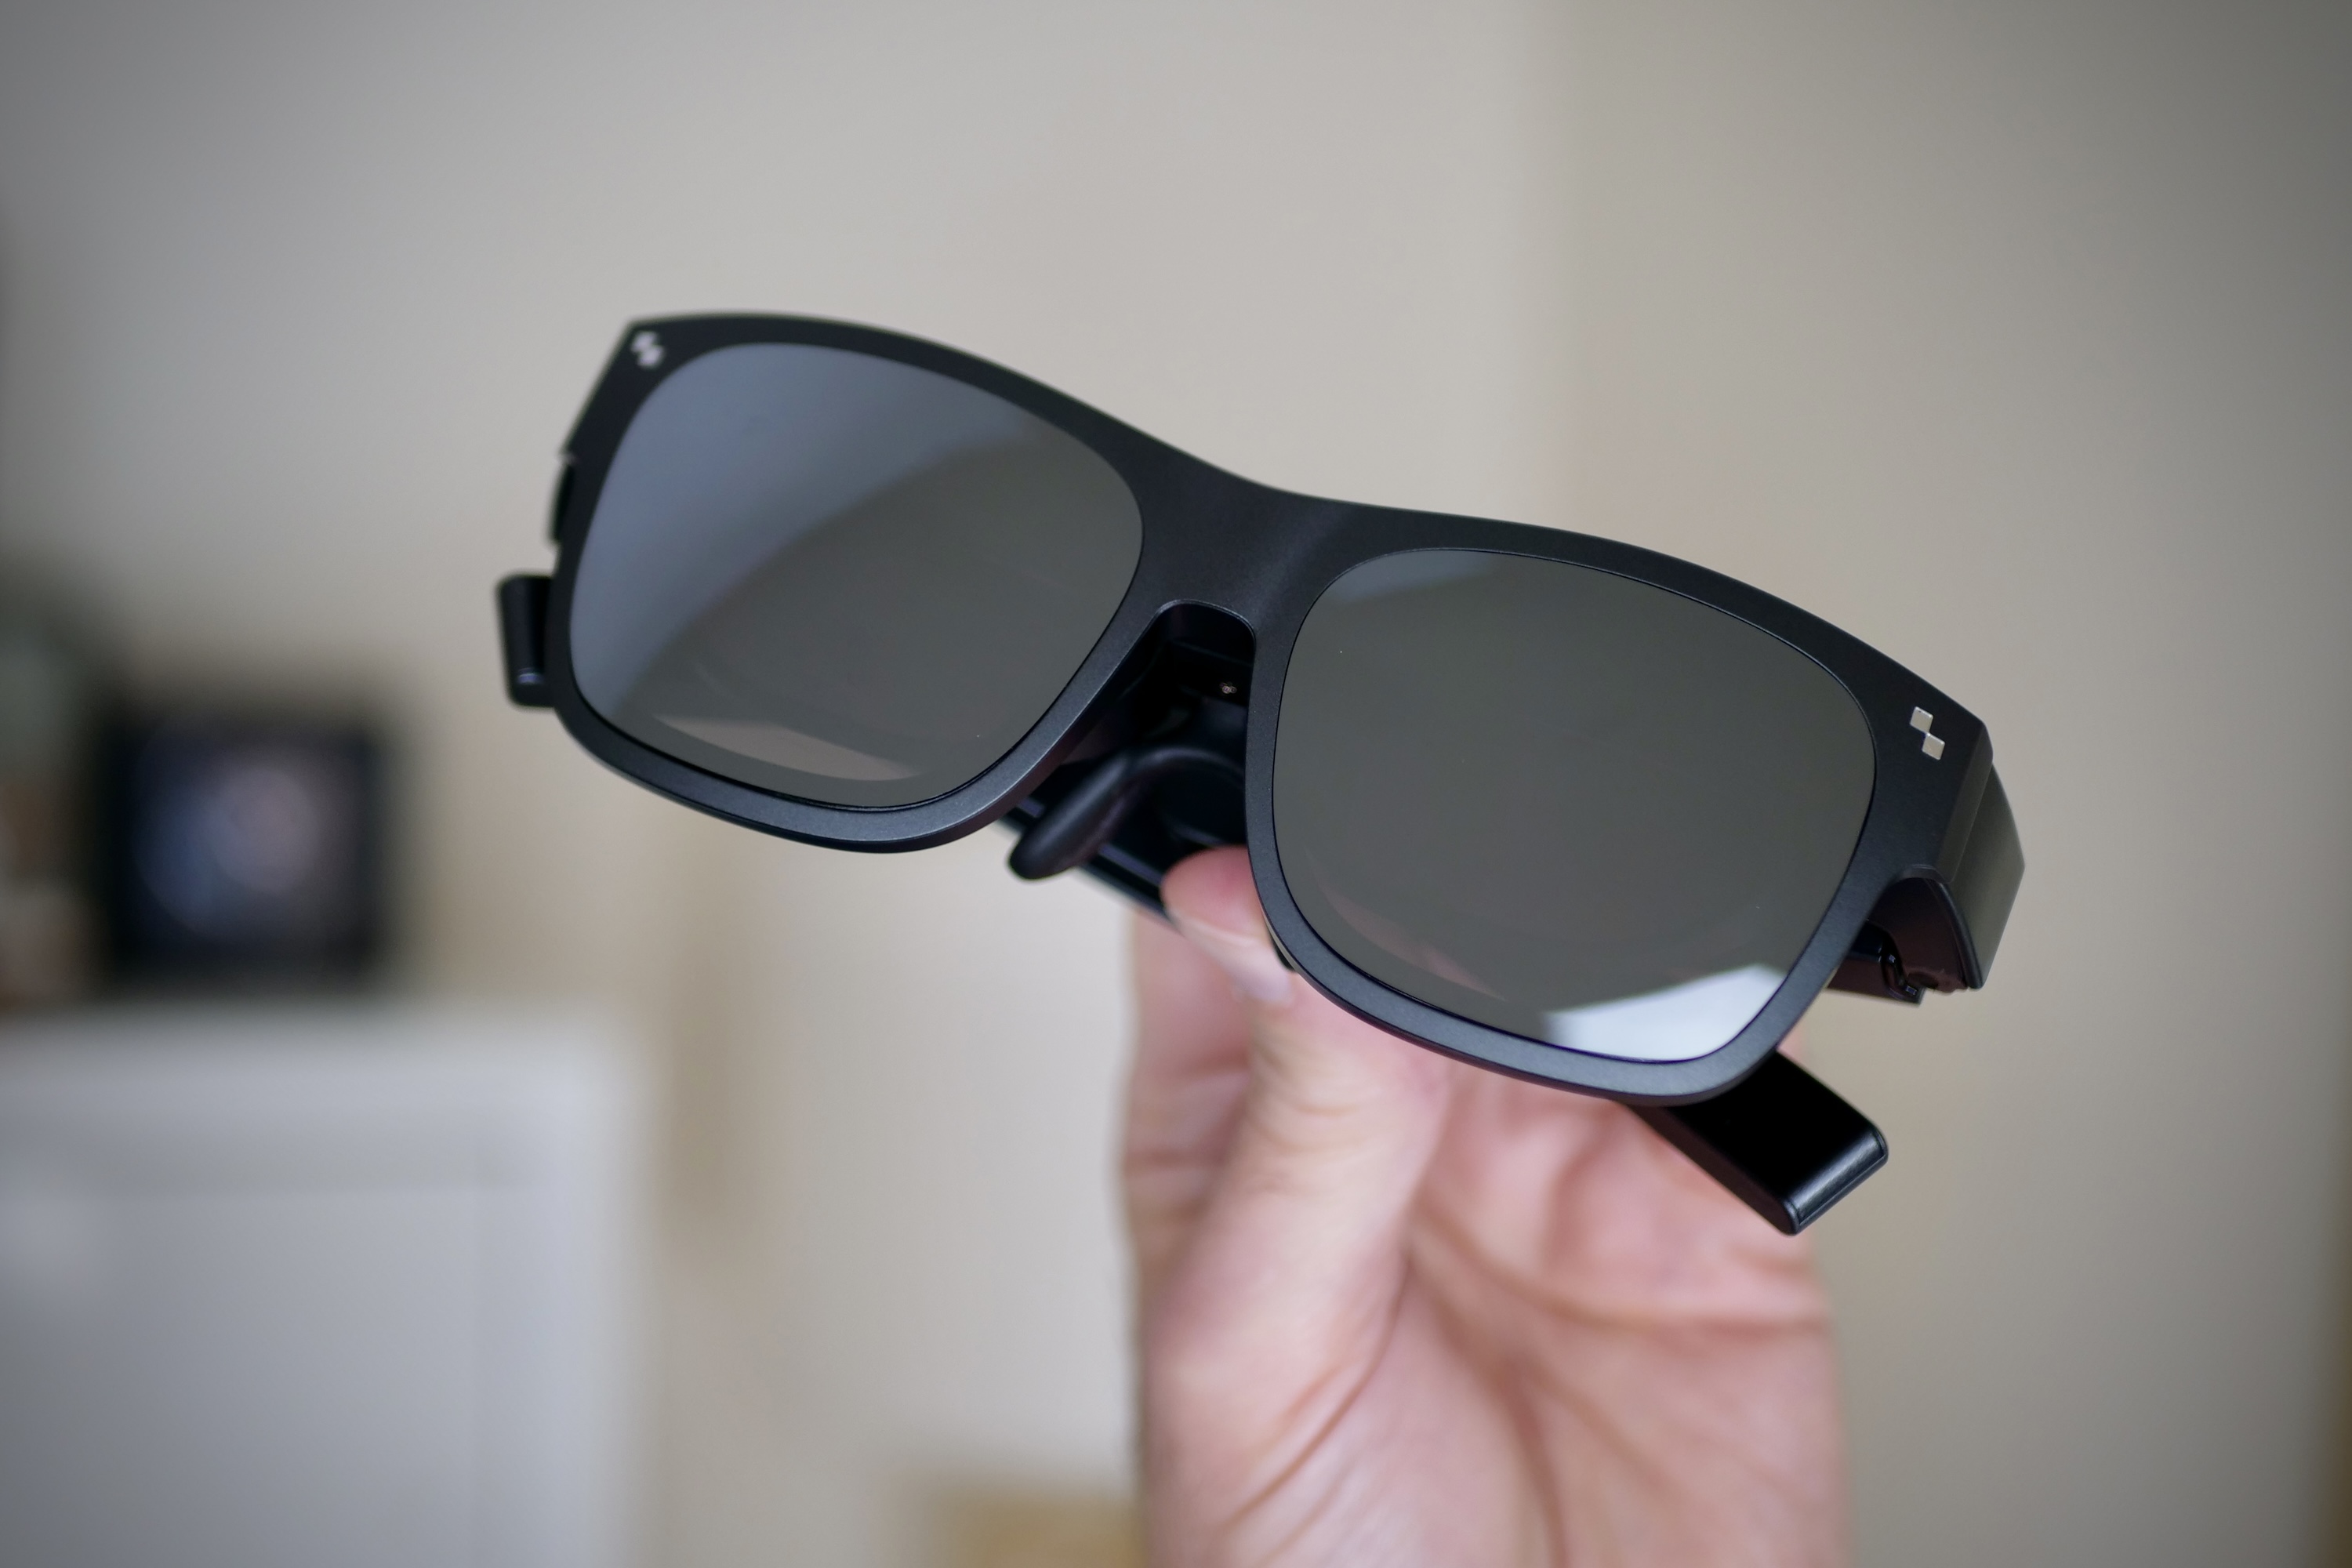 I wore smart glasses that made me excited for the future